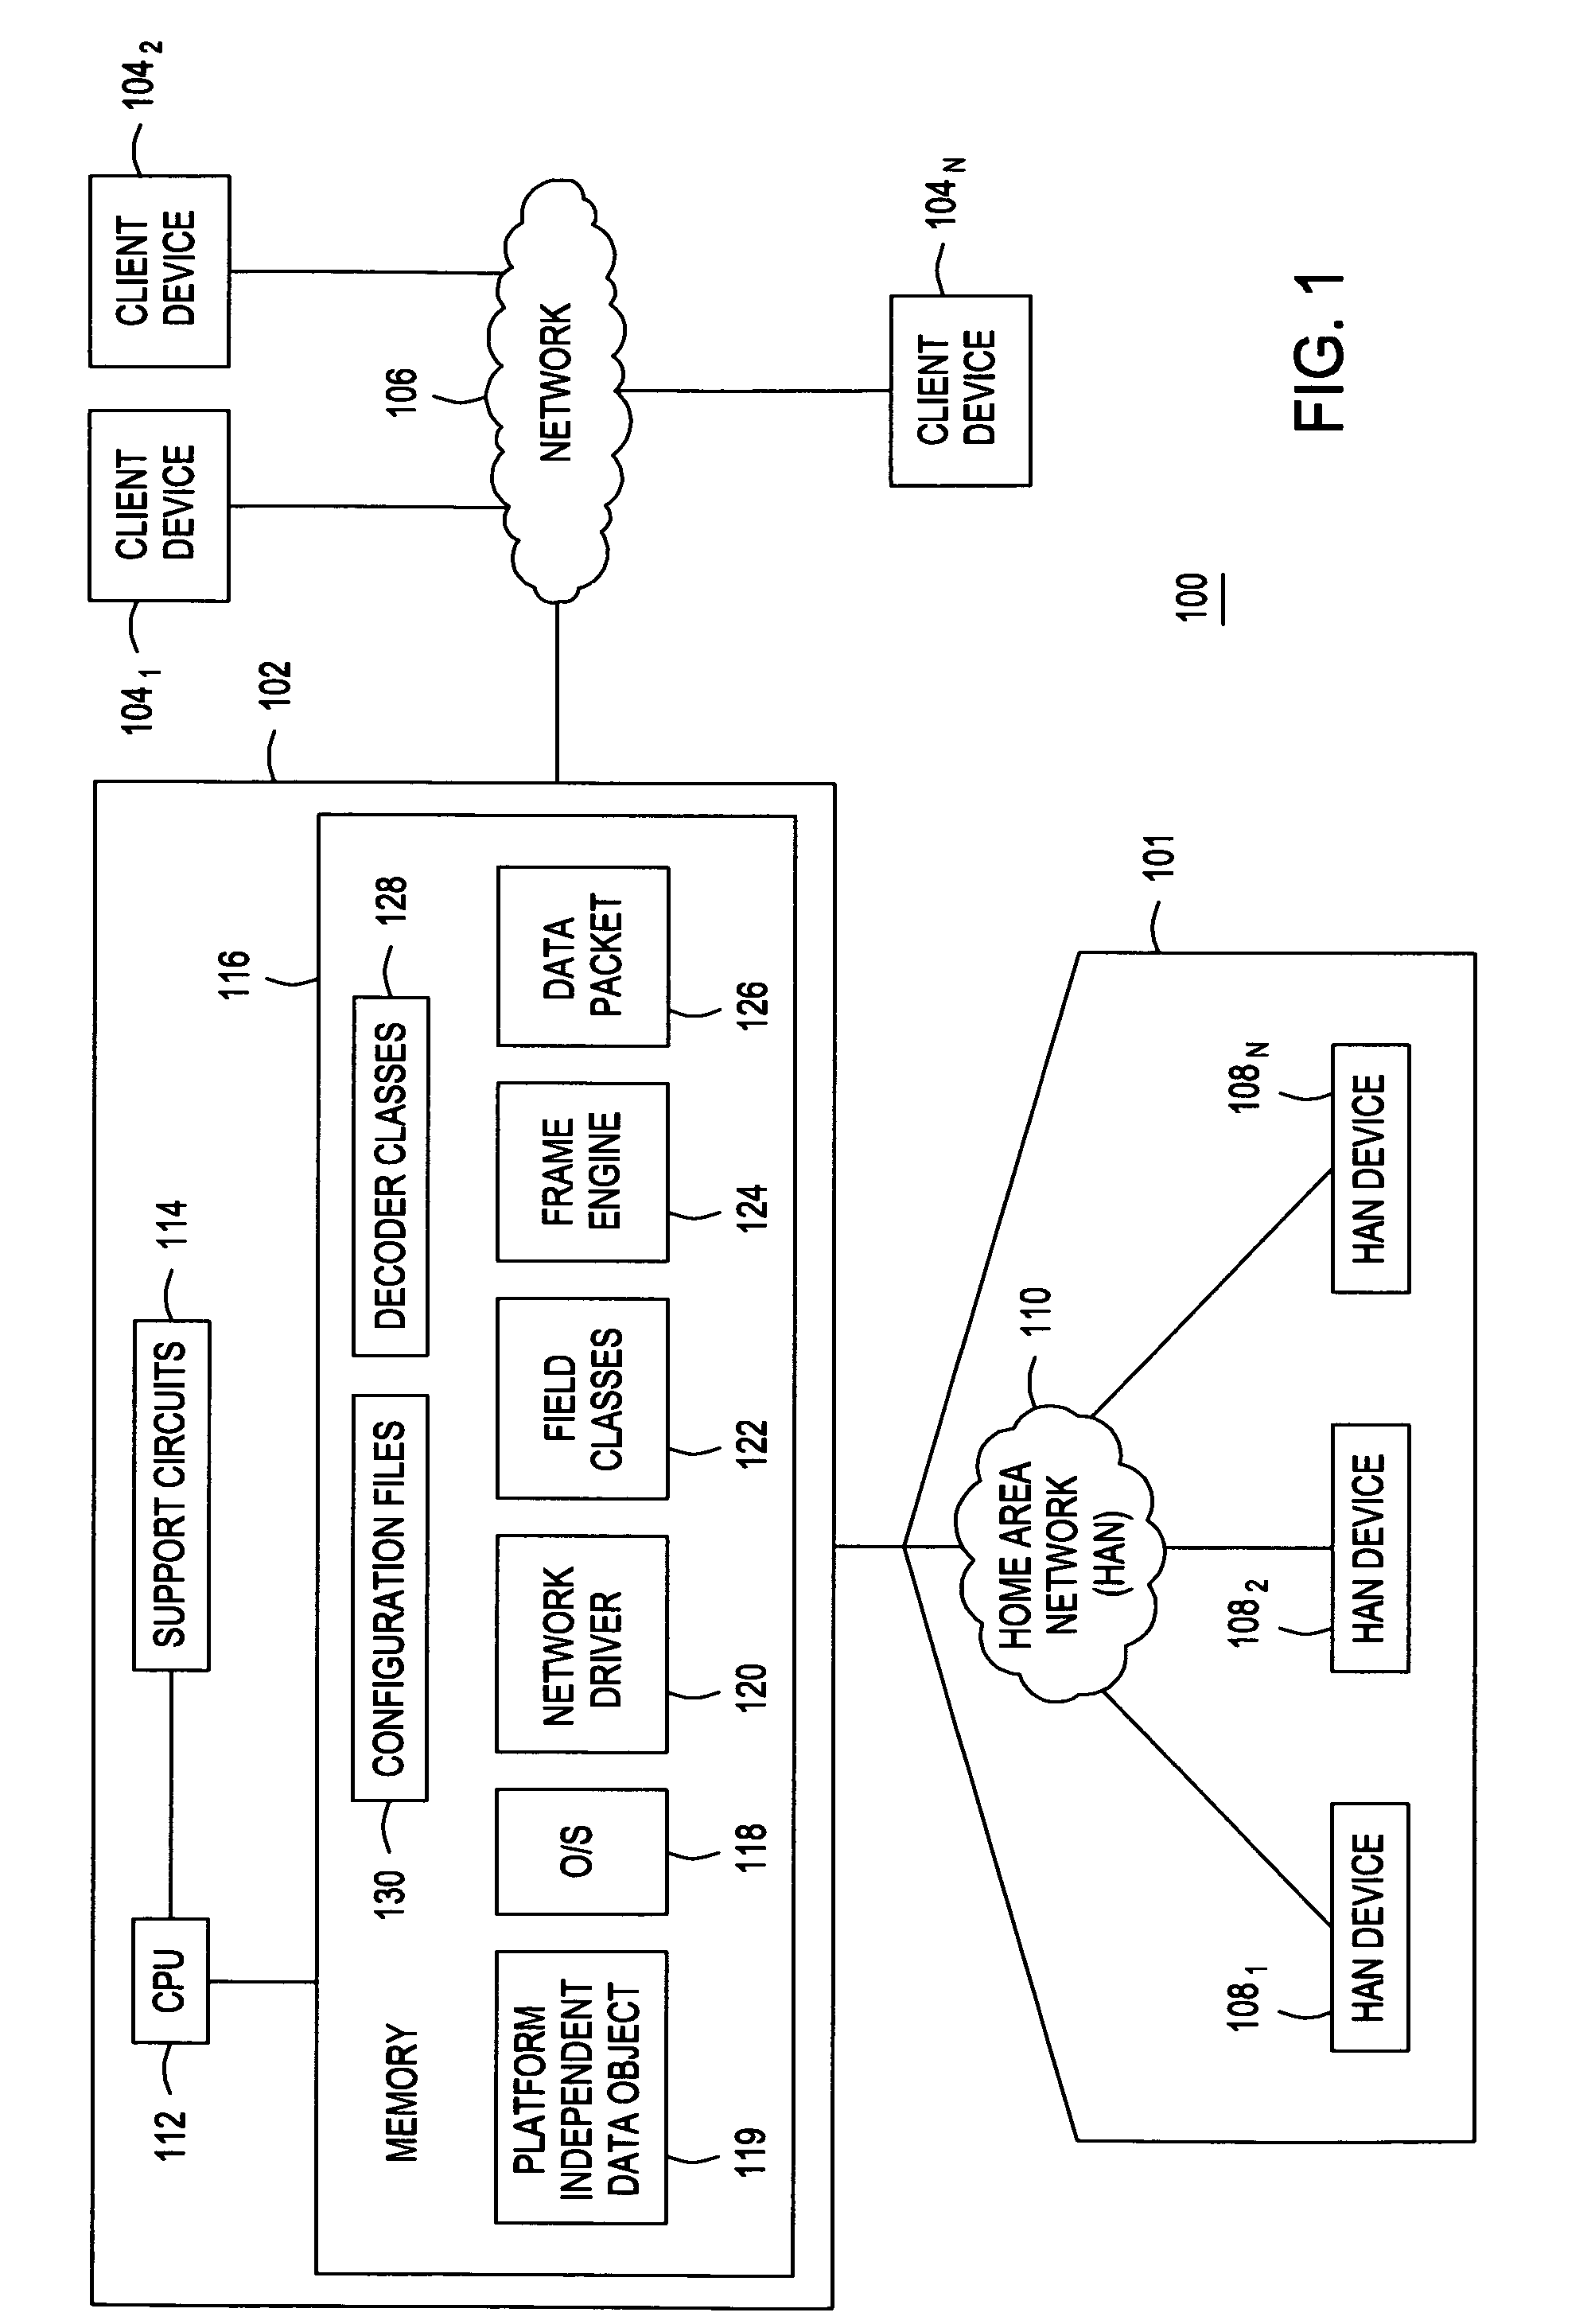 Method and apparatus for providing a home area network middleware interface